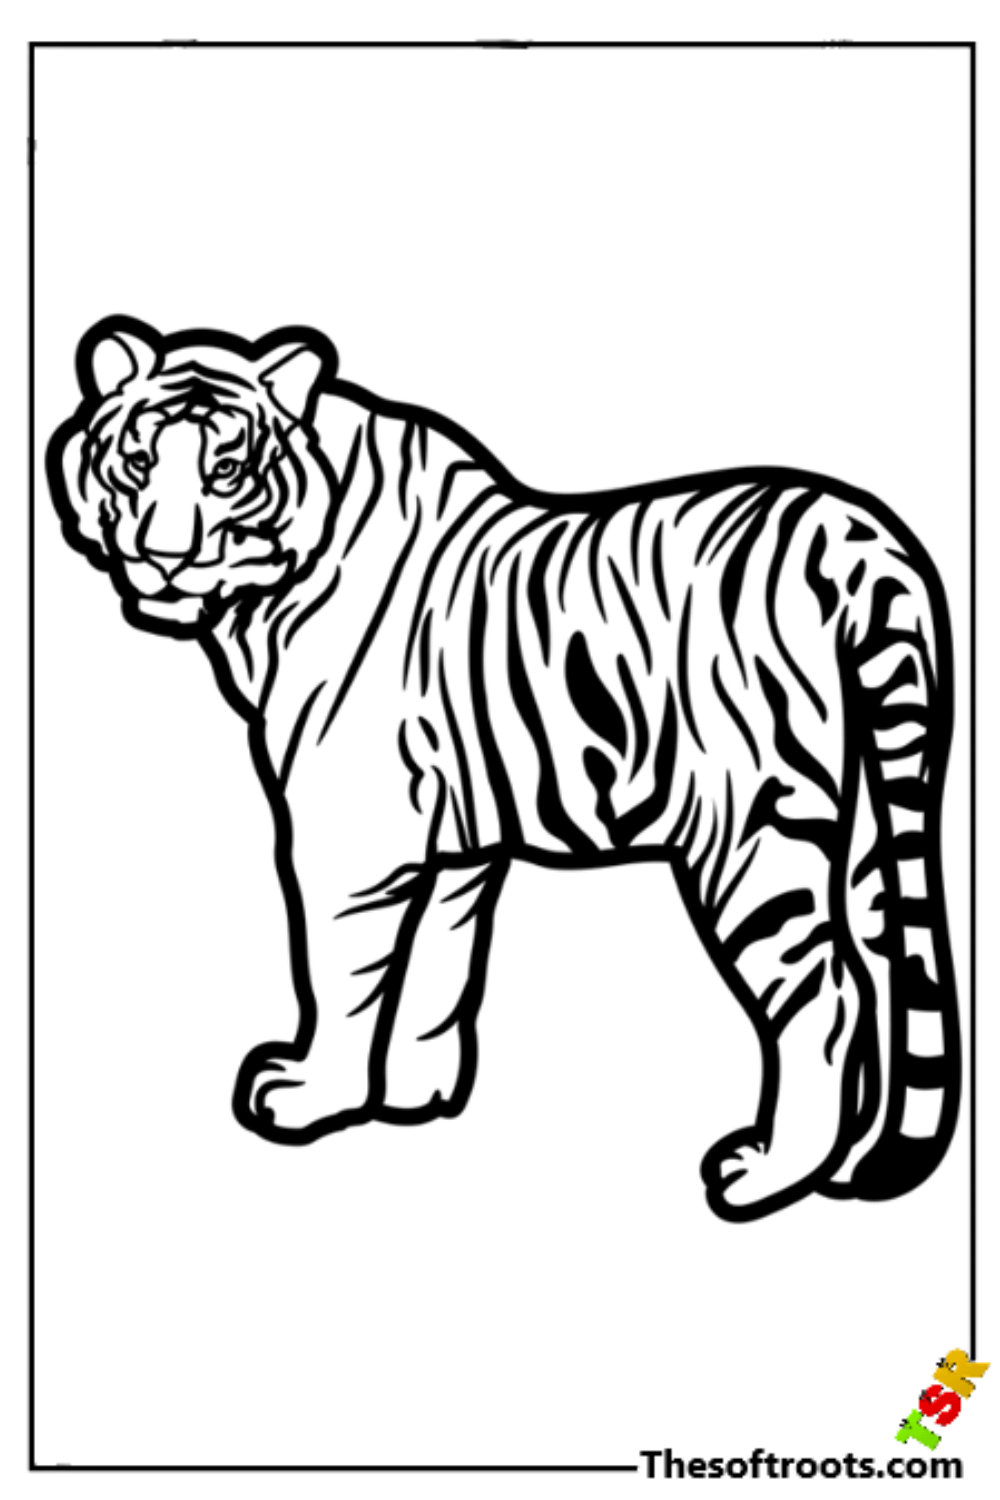 Printable tiger coloring pages rkidscoloringpages